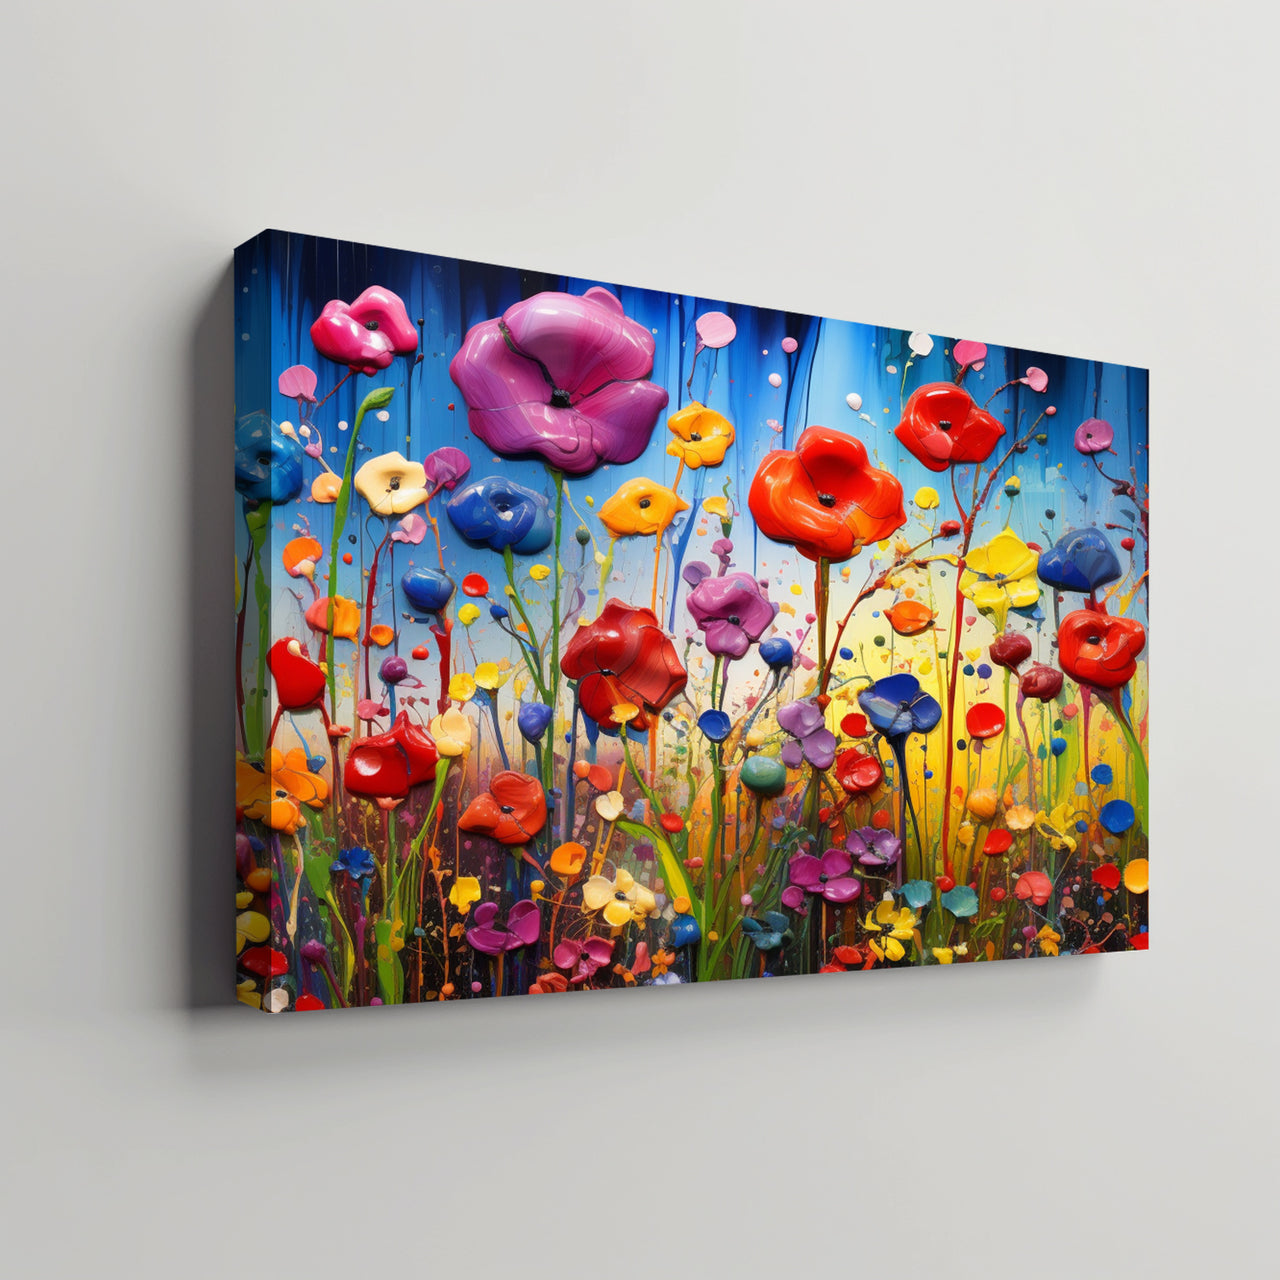 Wildflowers on Canvas, Colorful Wildflower Field Art Print 04, Minimalist Flower Wall Art, Abstract Wall Art, Watercolor flowers, Floral Print, Classic, Rustic Farmhouse, Wildflower Home Decor, Flower Painting Canvas, Floral Wall Art